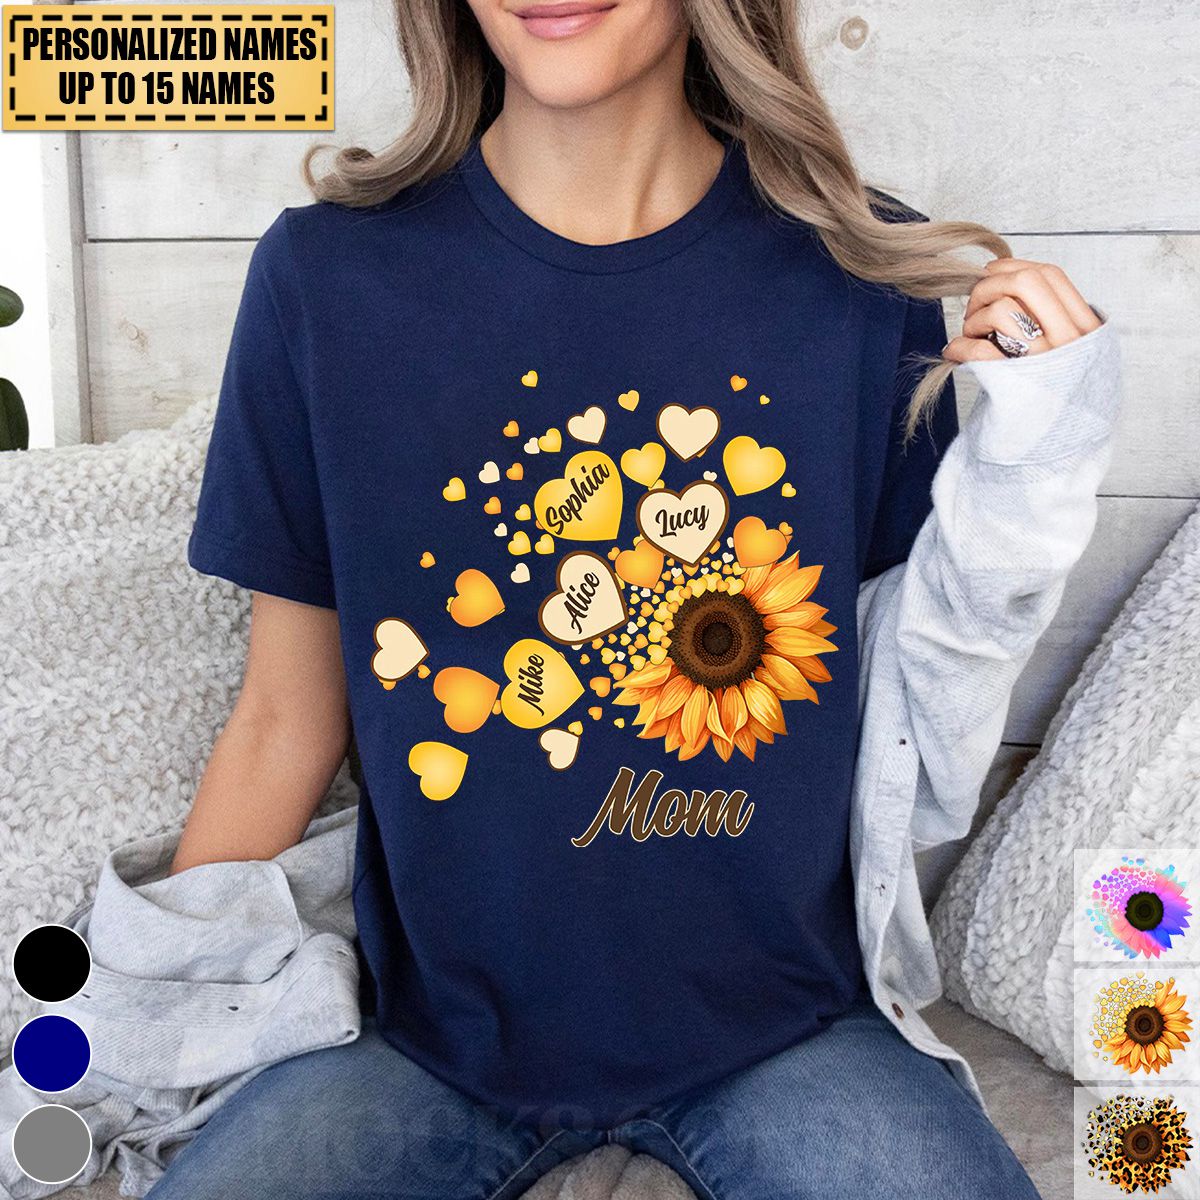 Grandma/Mom Kids Sunflower - Gift For Mother, Grandmother - Personalized T-Shirt